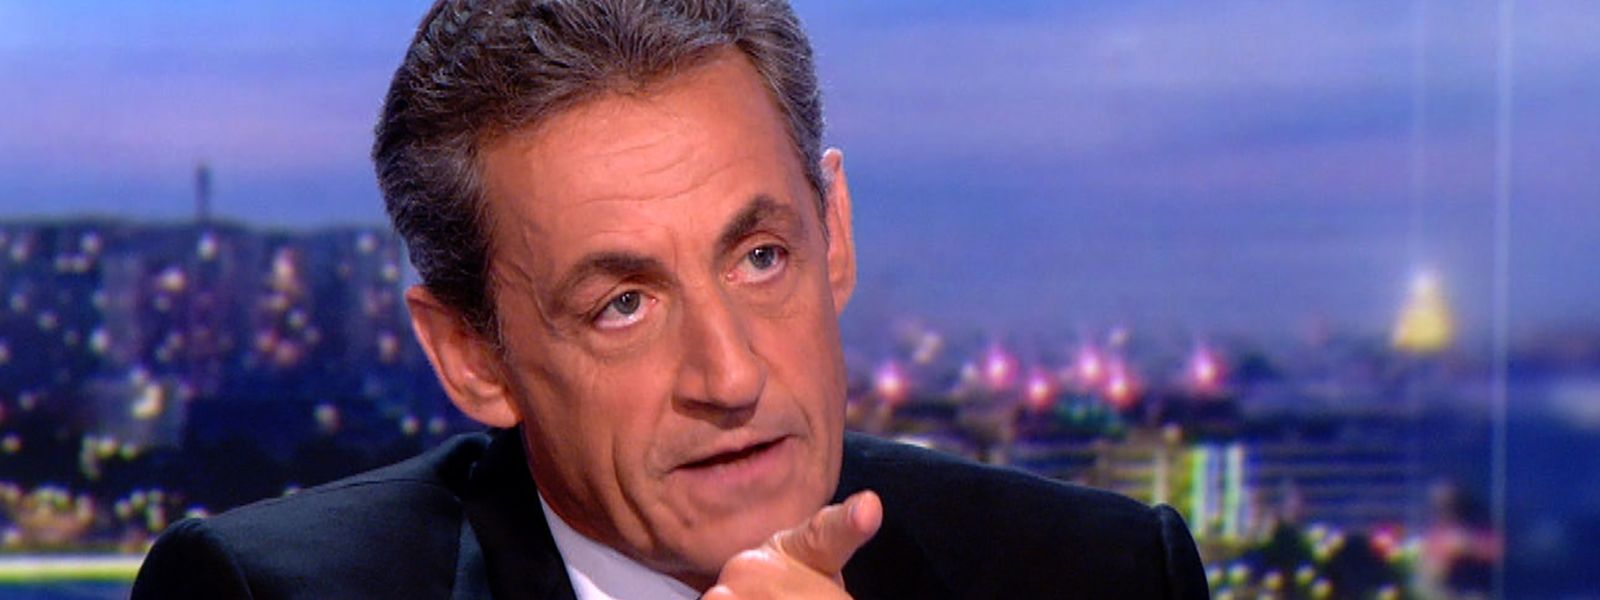 This video grab taken from footage released by French television channel TF1 shows French former president Nicolas Sarkozy speaking during an interview on March 22, 2018 at the TF1 headquarters in Boulogne-Billancourt, a day after he was charged on corruption over allegations that late Libyan dictator funded his 2007 presidential election campaign, one of France's most explosive political scandals in years. / AFP PHOTO / TF1 / Handout